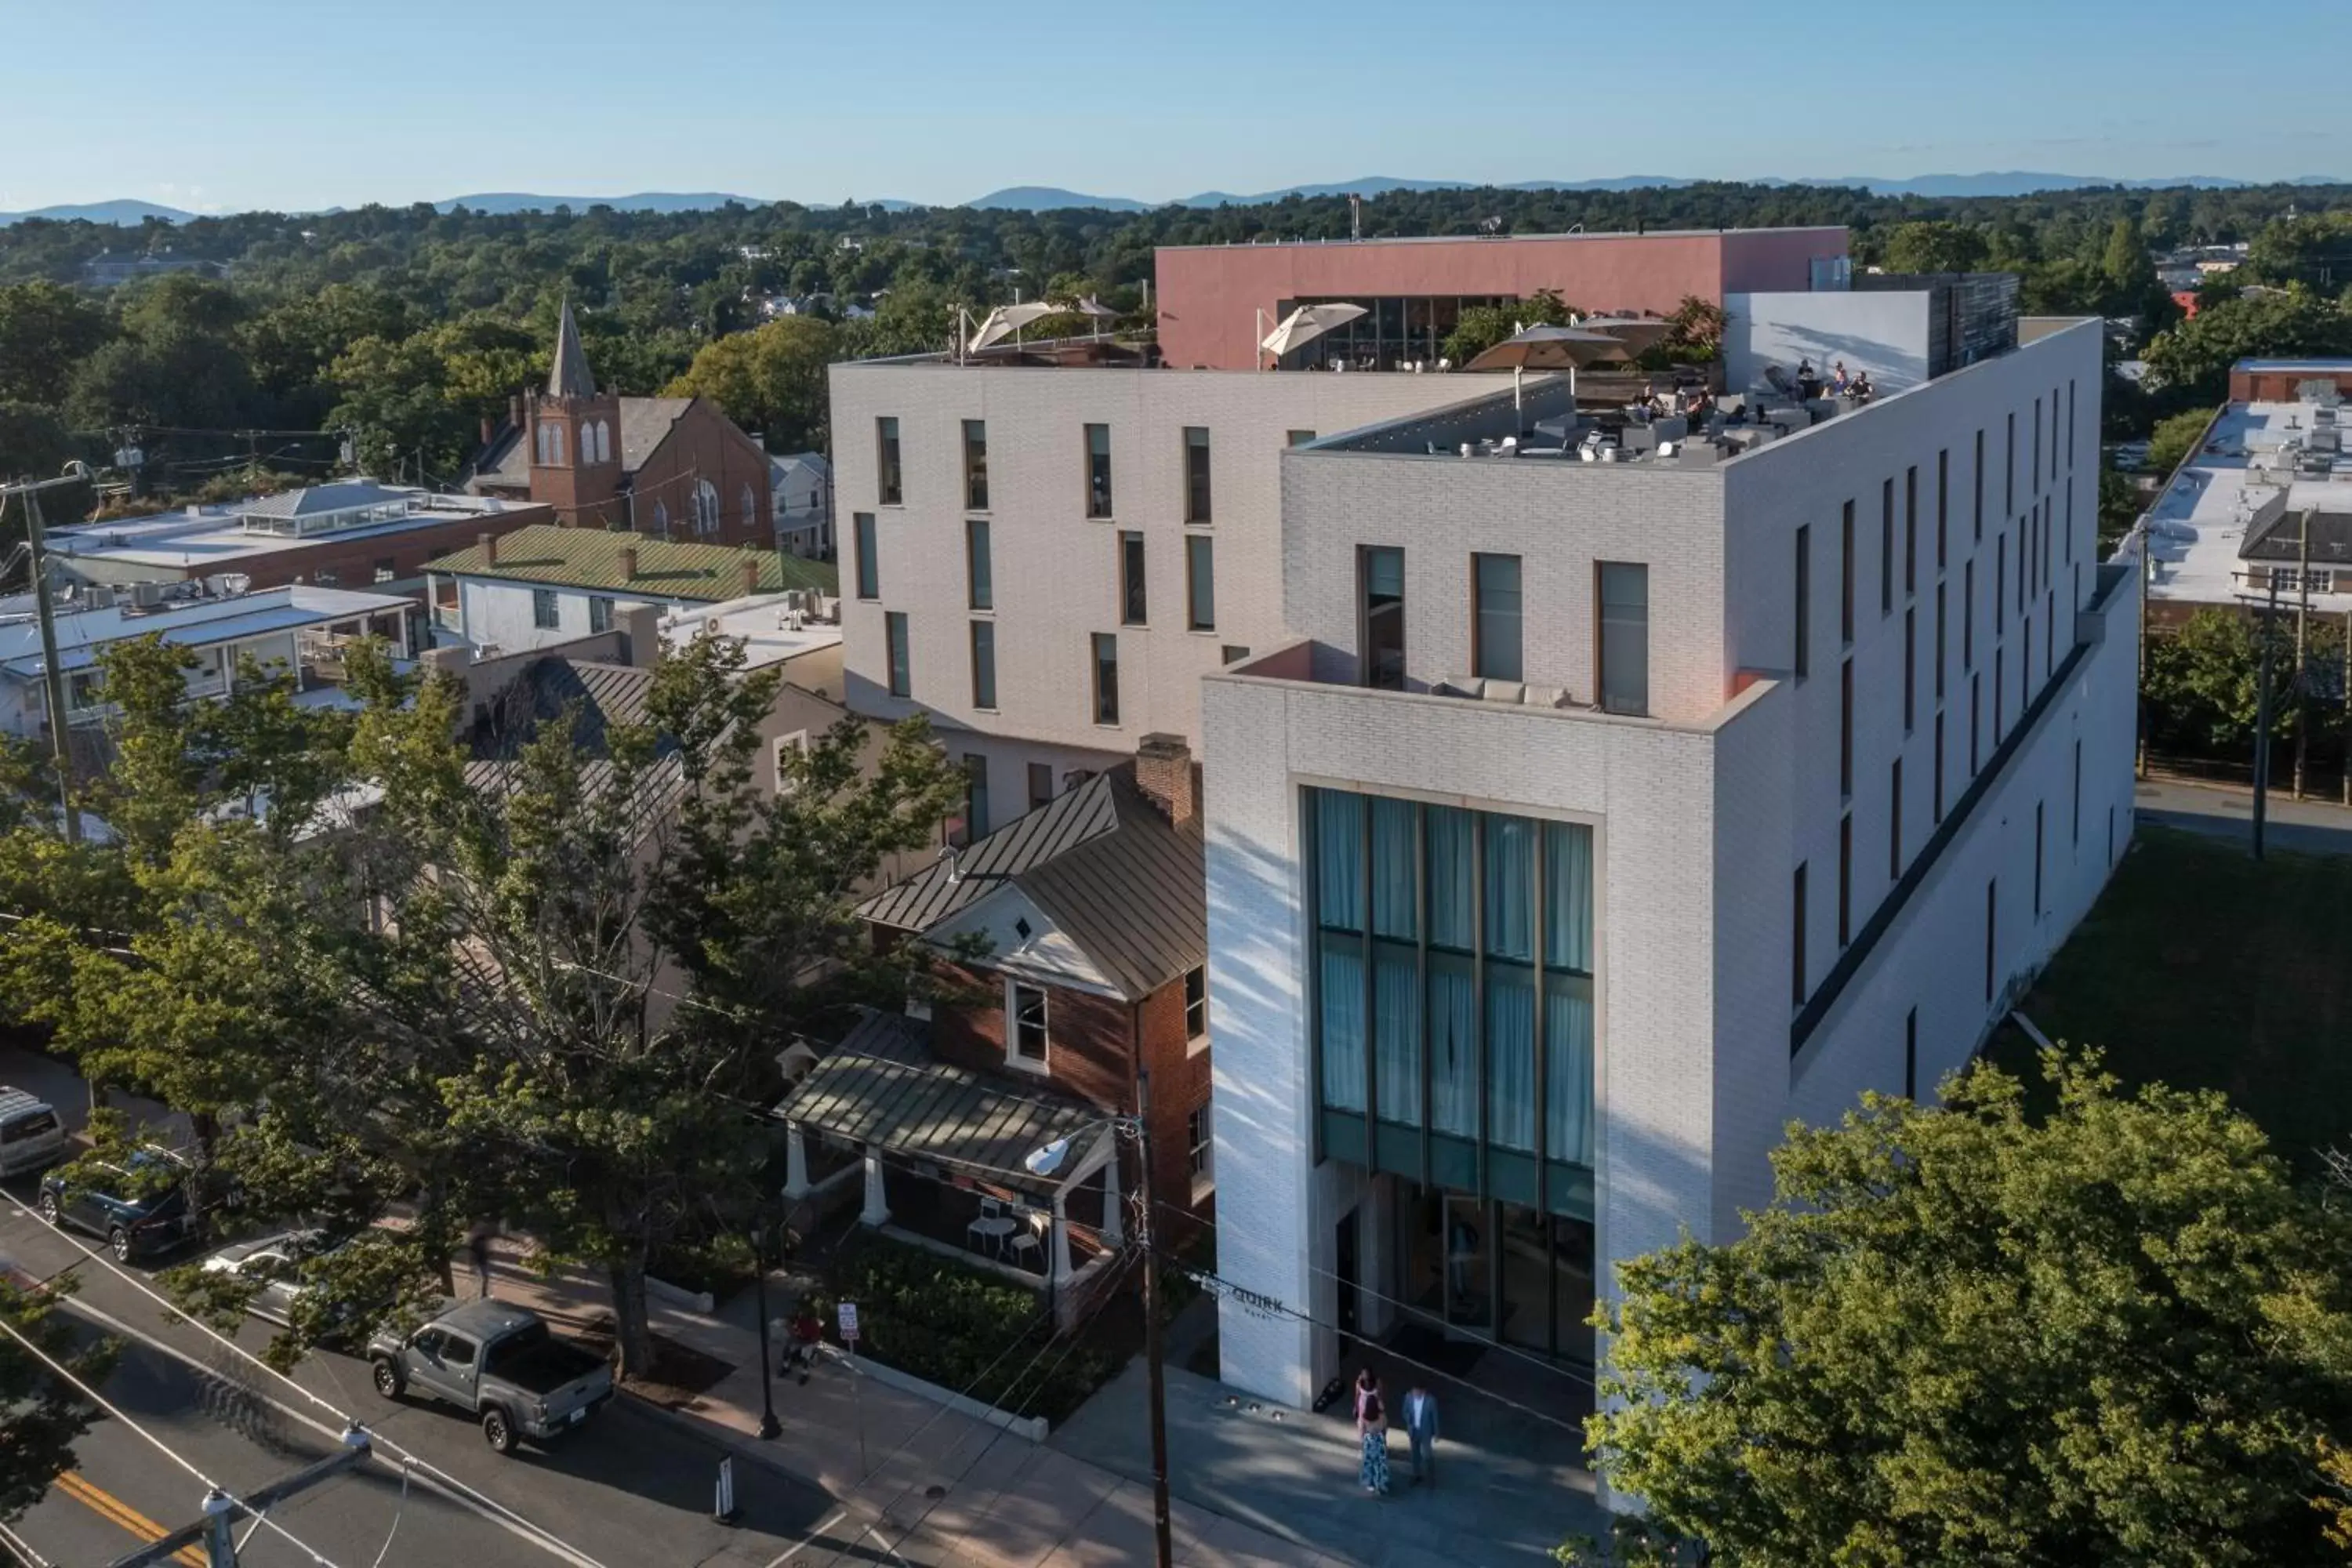 Property building, Bird's-eye View in Quirk Hotel Charlottesville